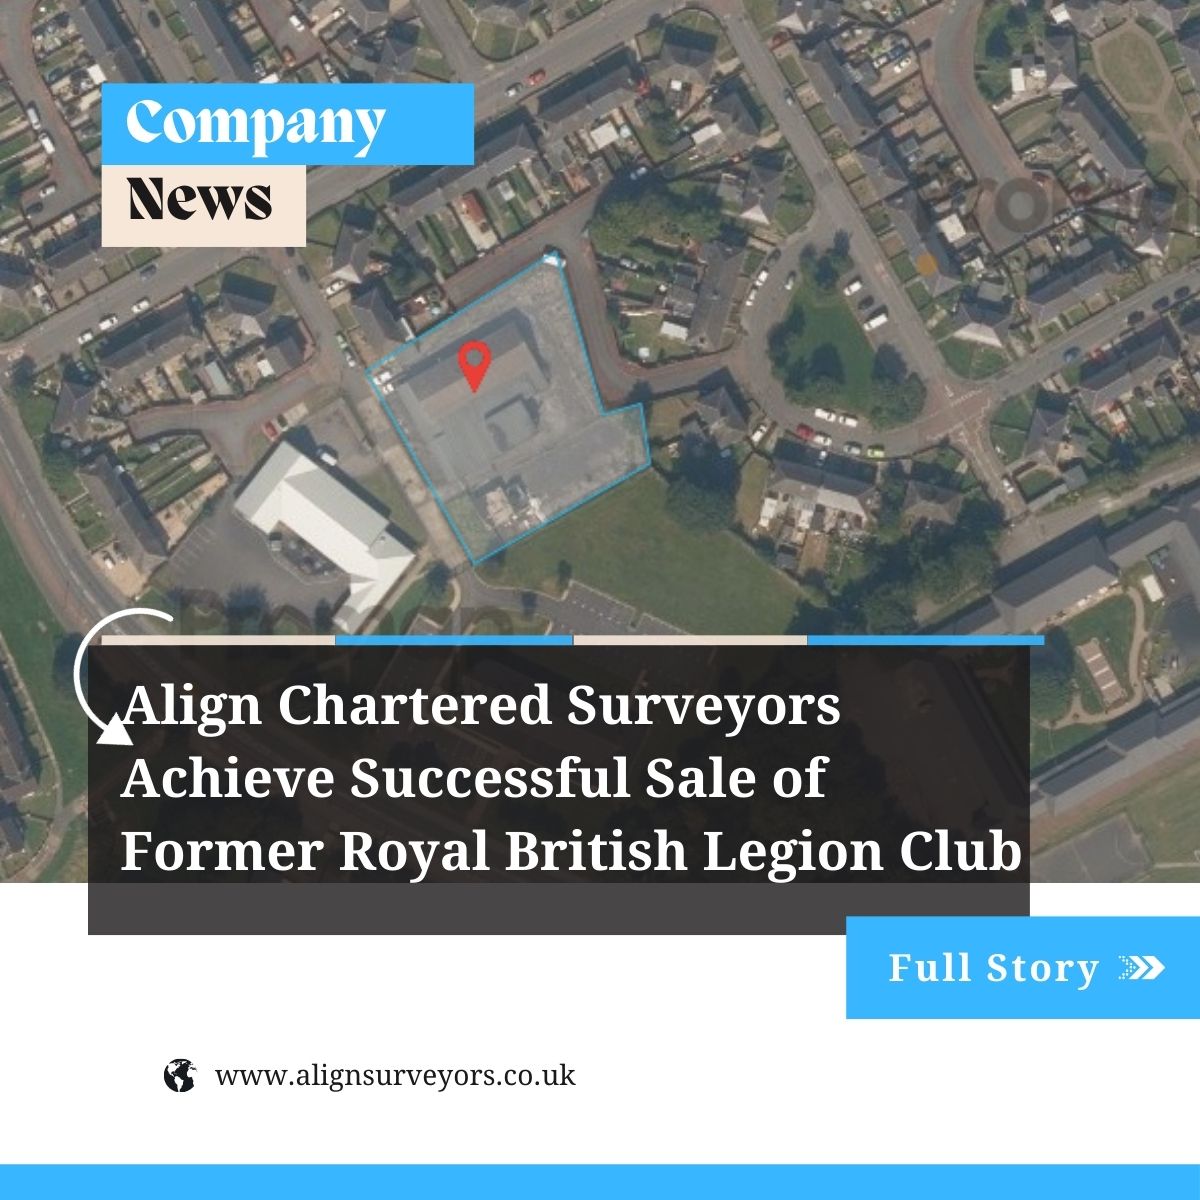 News Story - Align Chartered Surveyors Achieve successful Sale of Former Royal British Legion Club